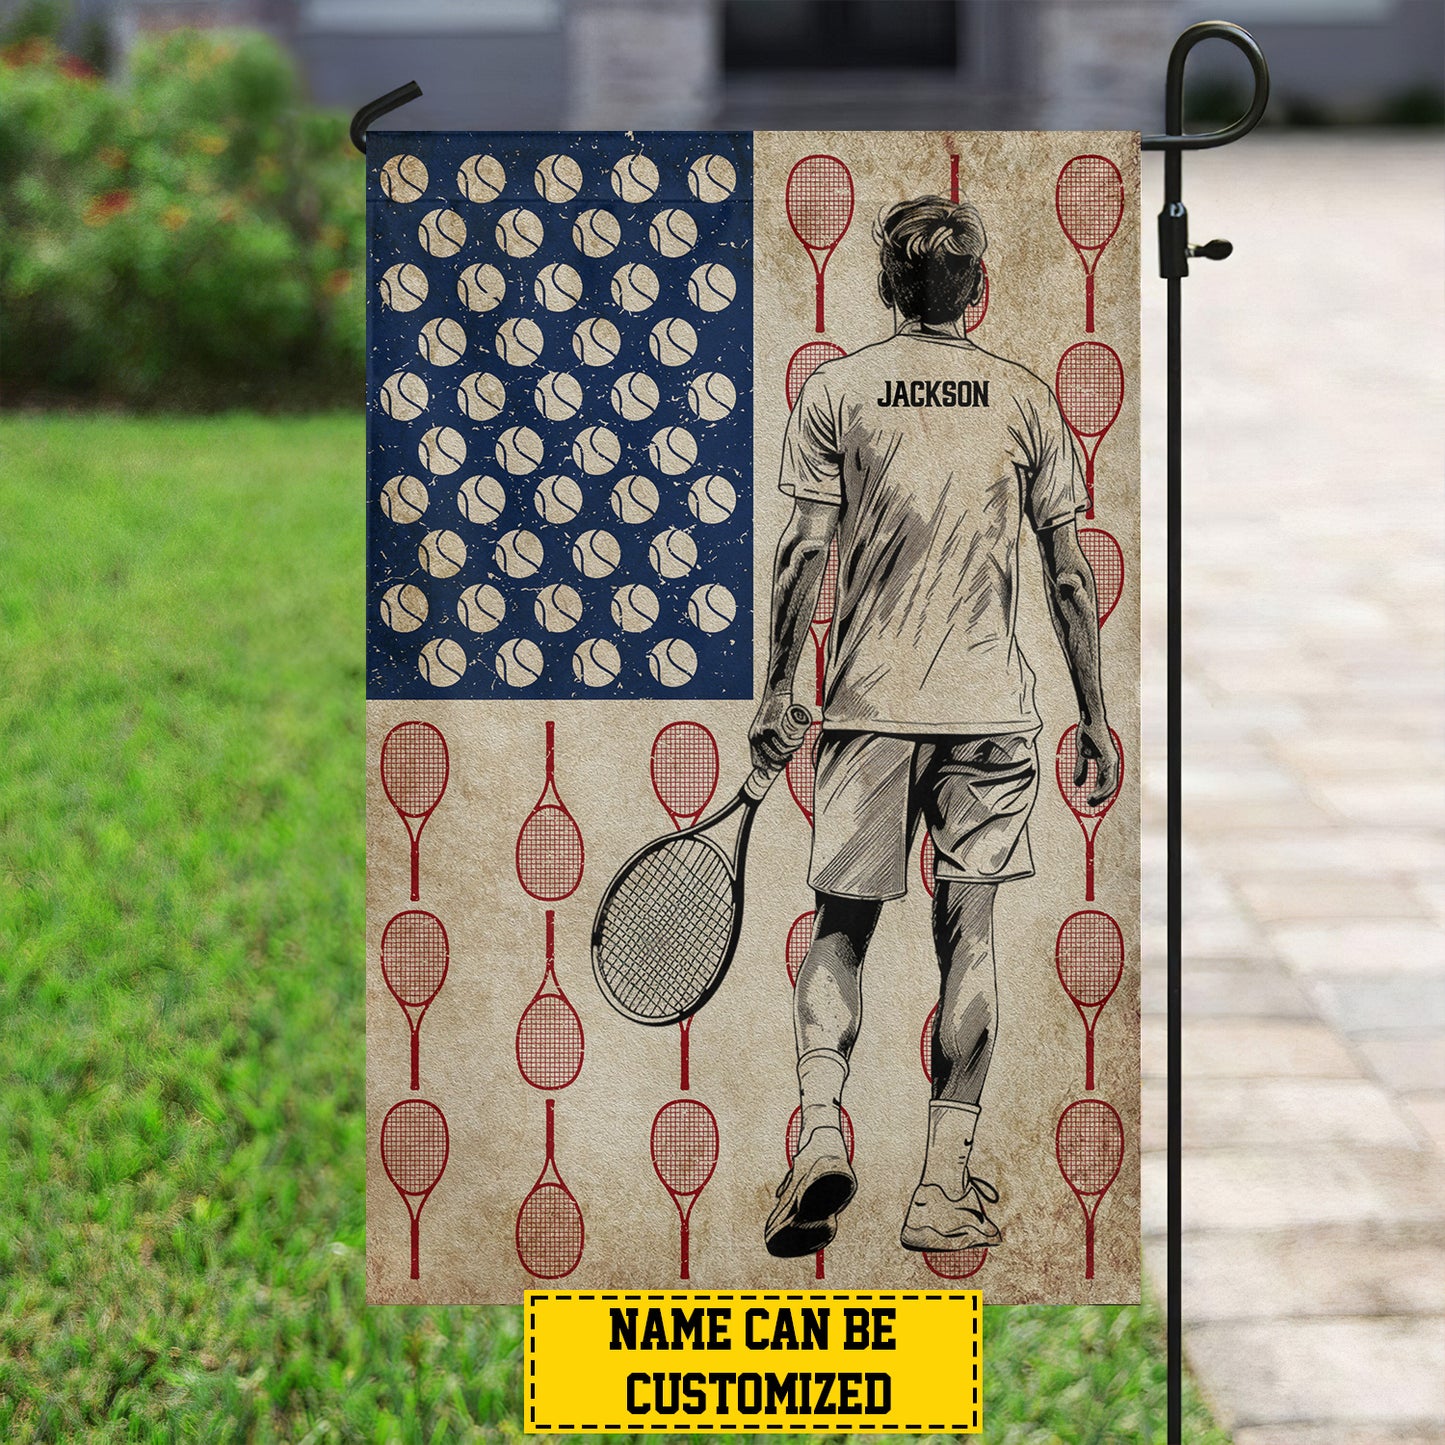 Personalized July 4th Tennis Boy Garden Flag & House Flag, Tennis Triumph, Independence Day Yard Flag Gift For Tennis Lovers, Tennis Players